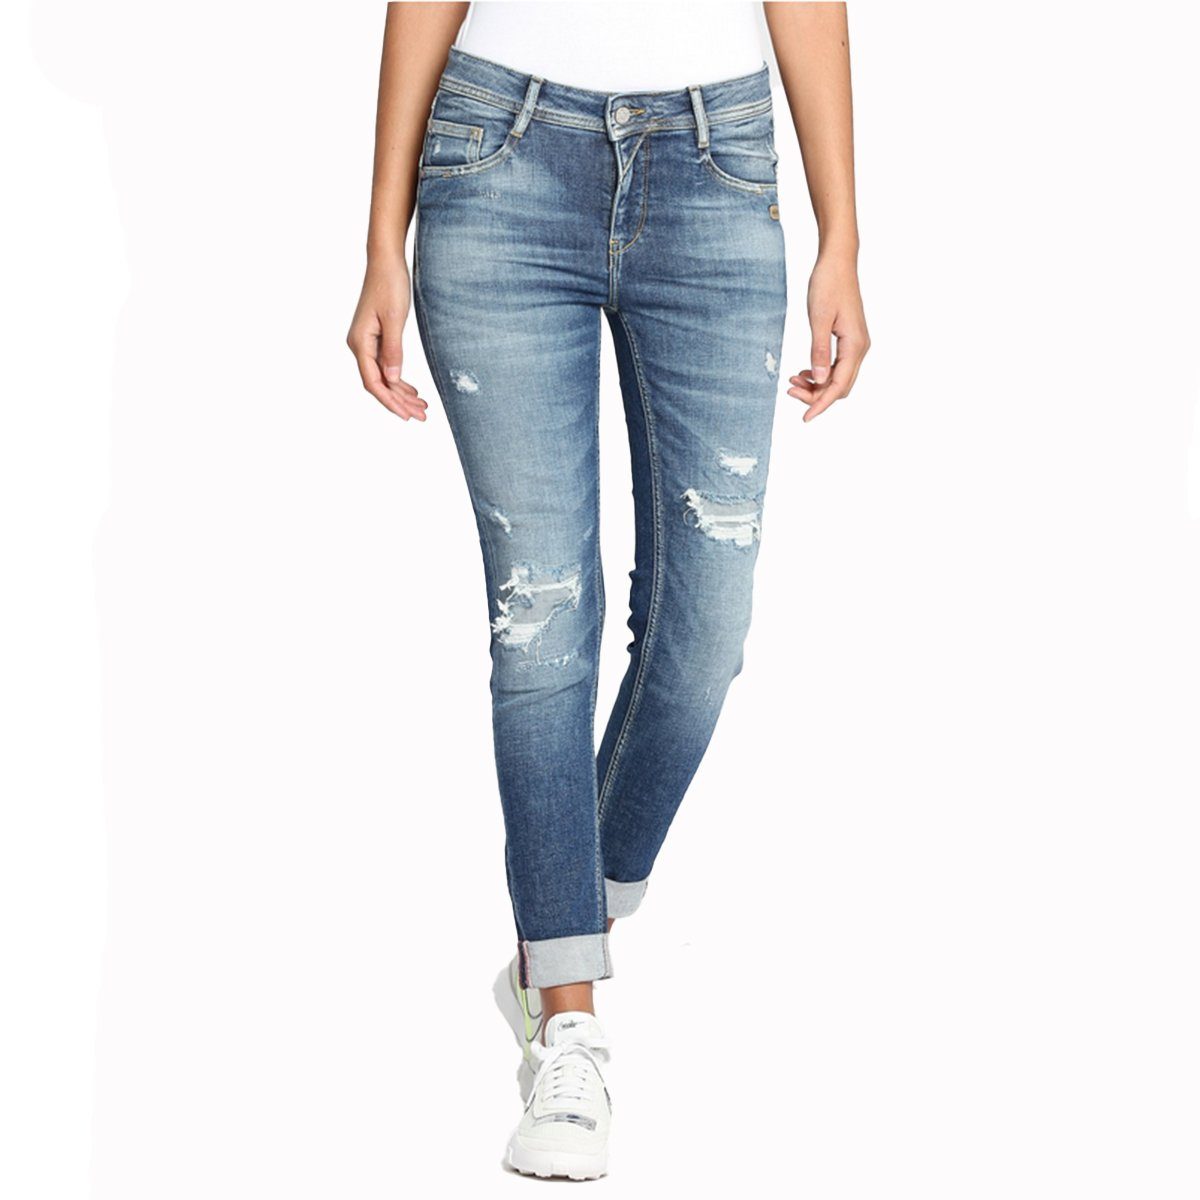 Relaxed Fit - Jeans Amelie midblue destroy GANG 5-Pocket-Jeans